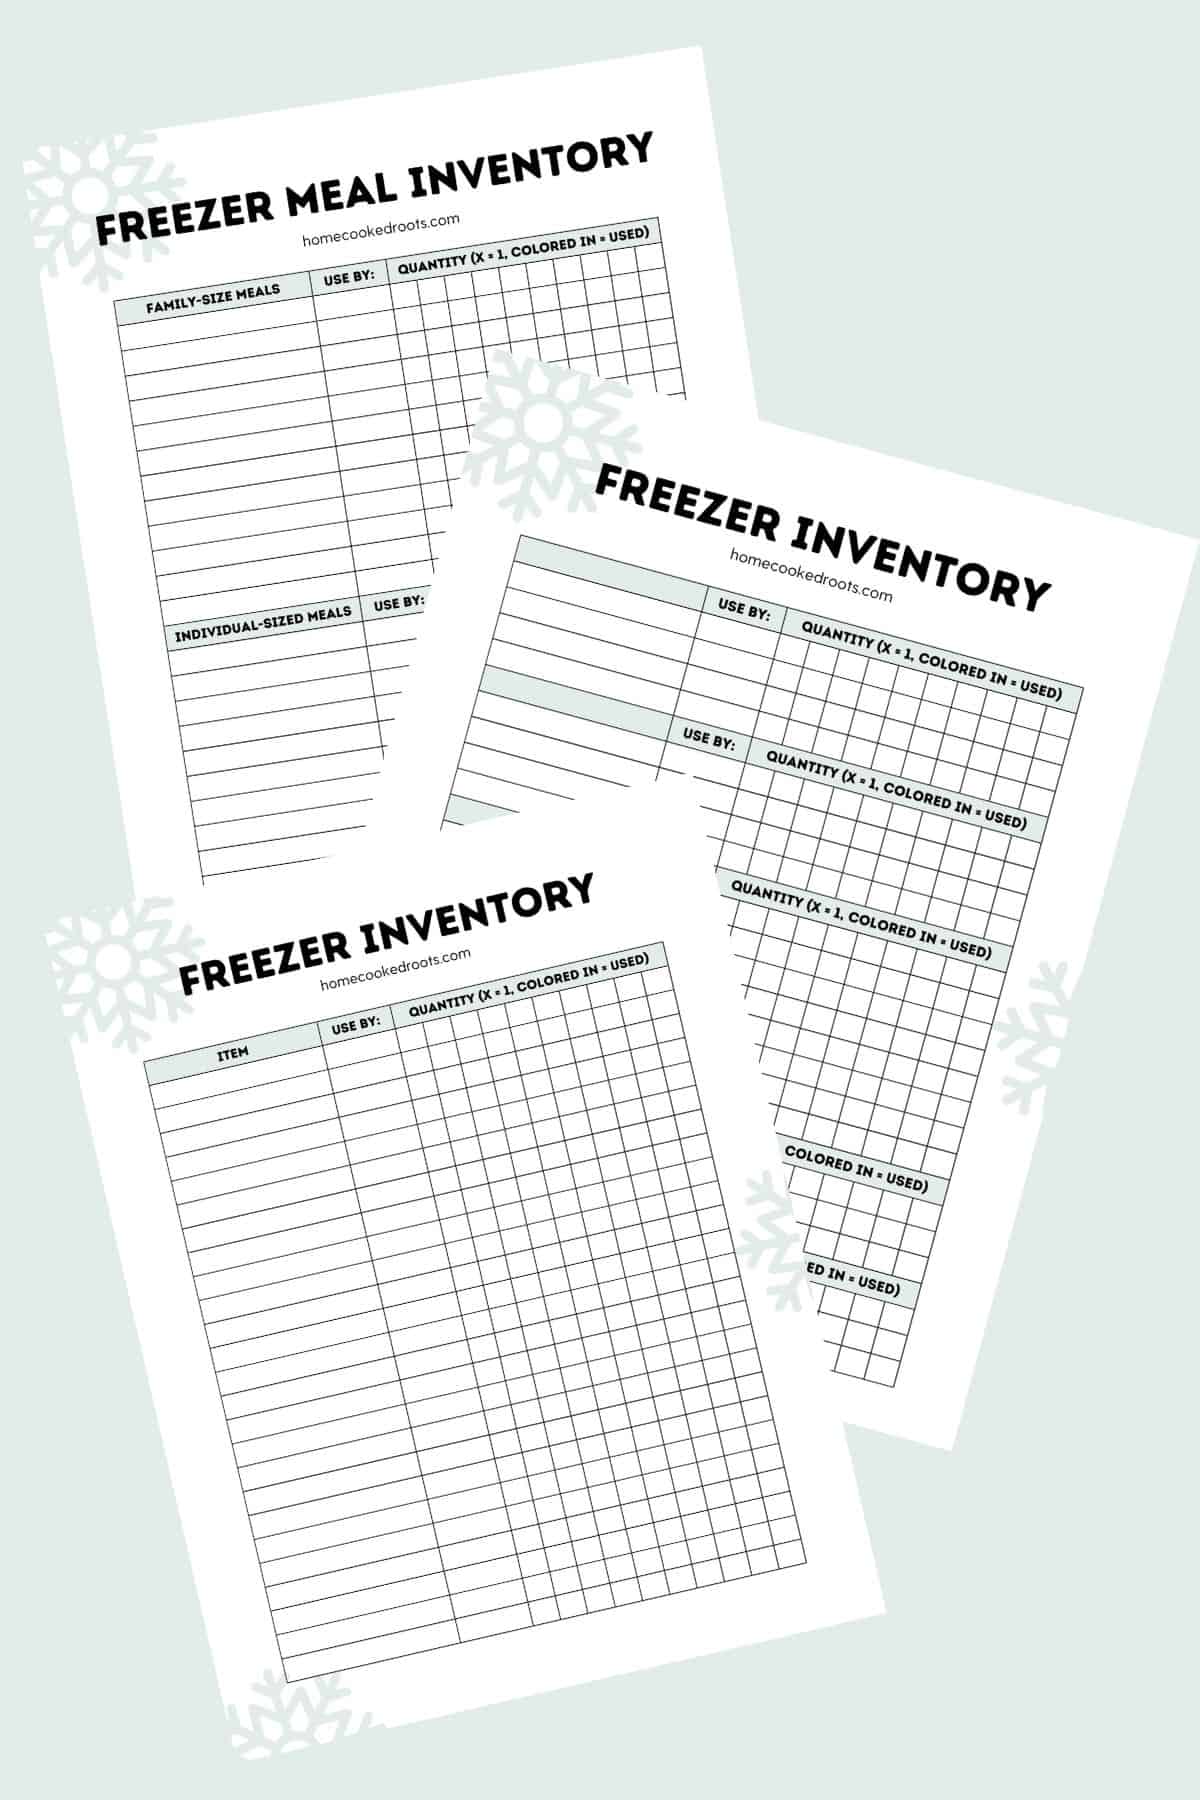 Graphic of the freezer inventory sheets included.